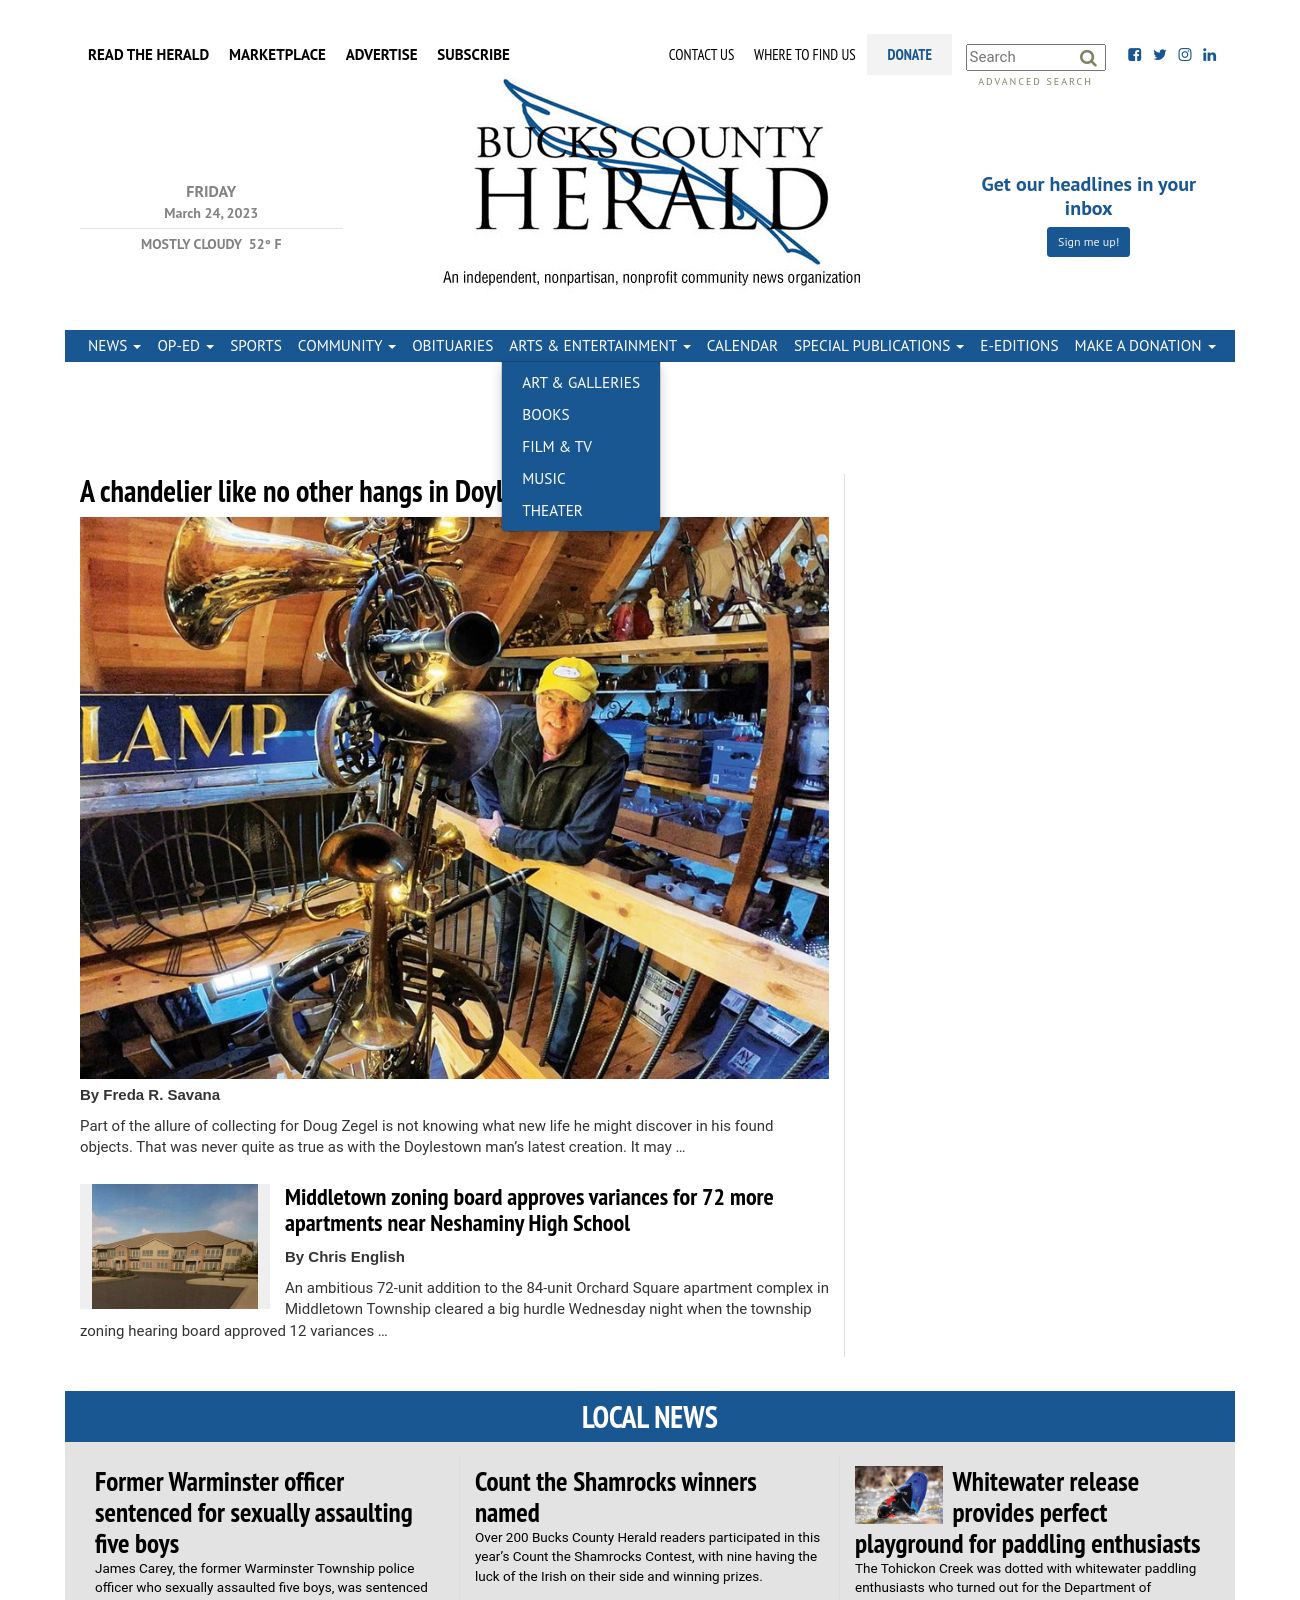 Bucks County Herald at 2023-03-24 06:26:30-04:00 local time